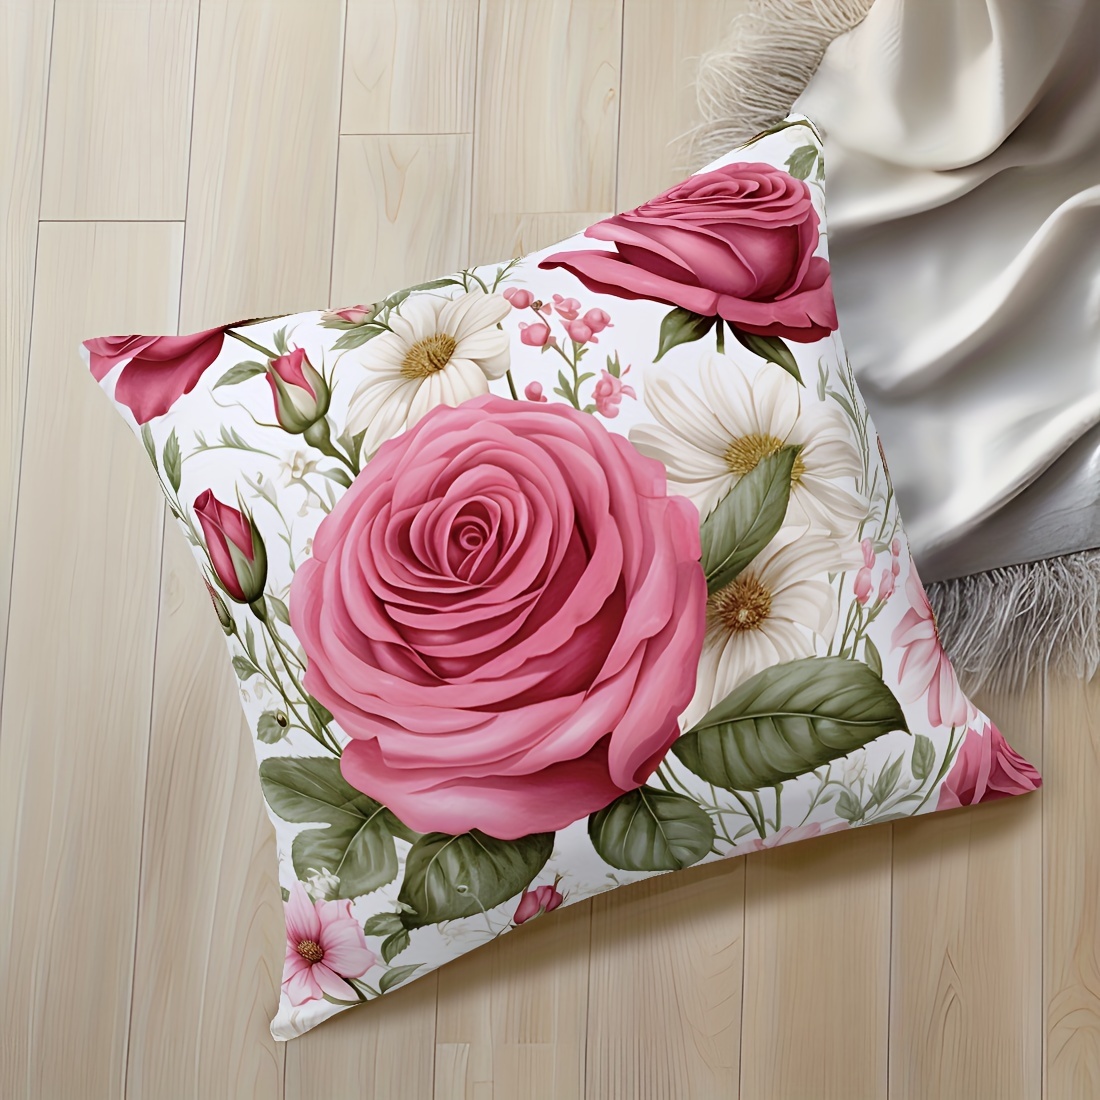 

1pc/4-pack Contemporary Style Daisy & Rose Floral Design Peach Skin Velvet Throw Pillow Cover, Comfortable Home Cushion Case For Living Room Bedroom Sofa, 45cm (17.71in) - No Insert Included